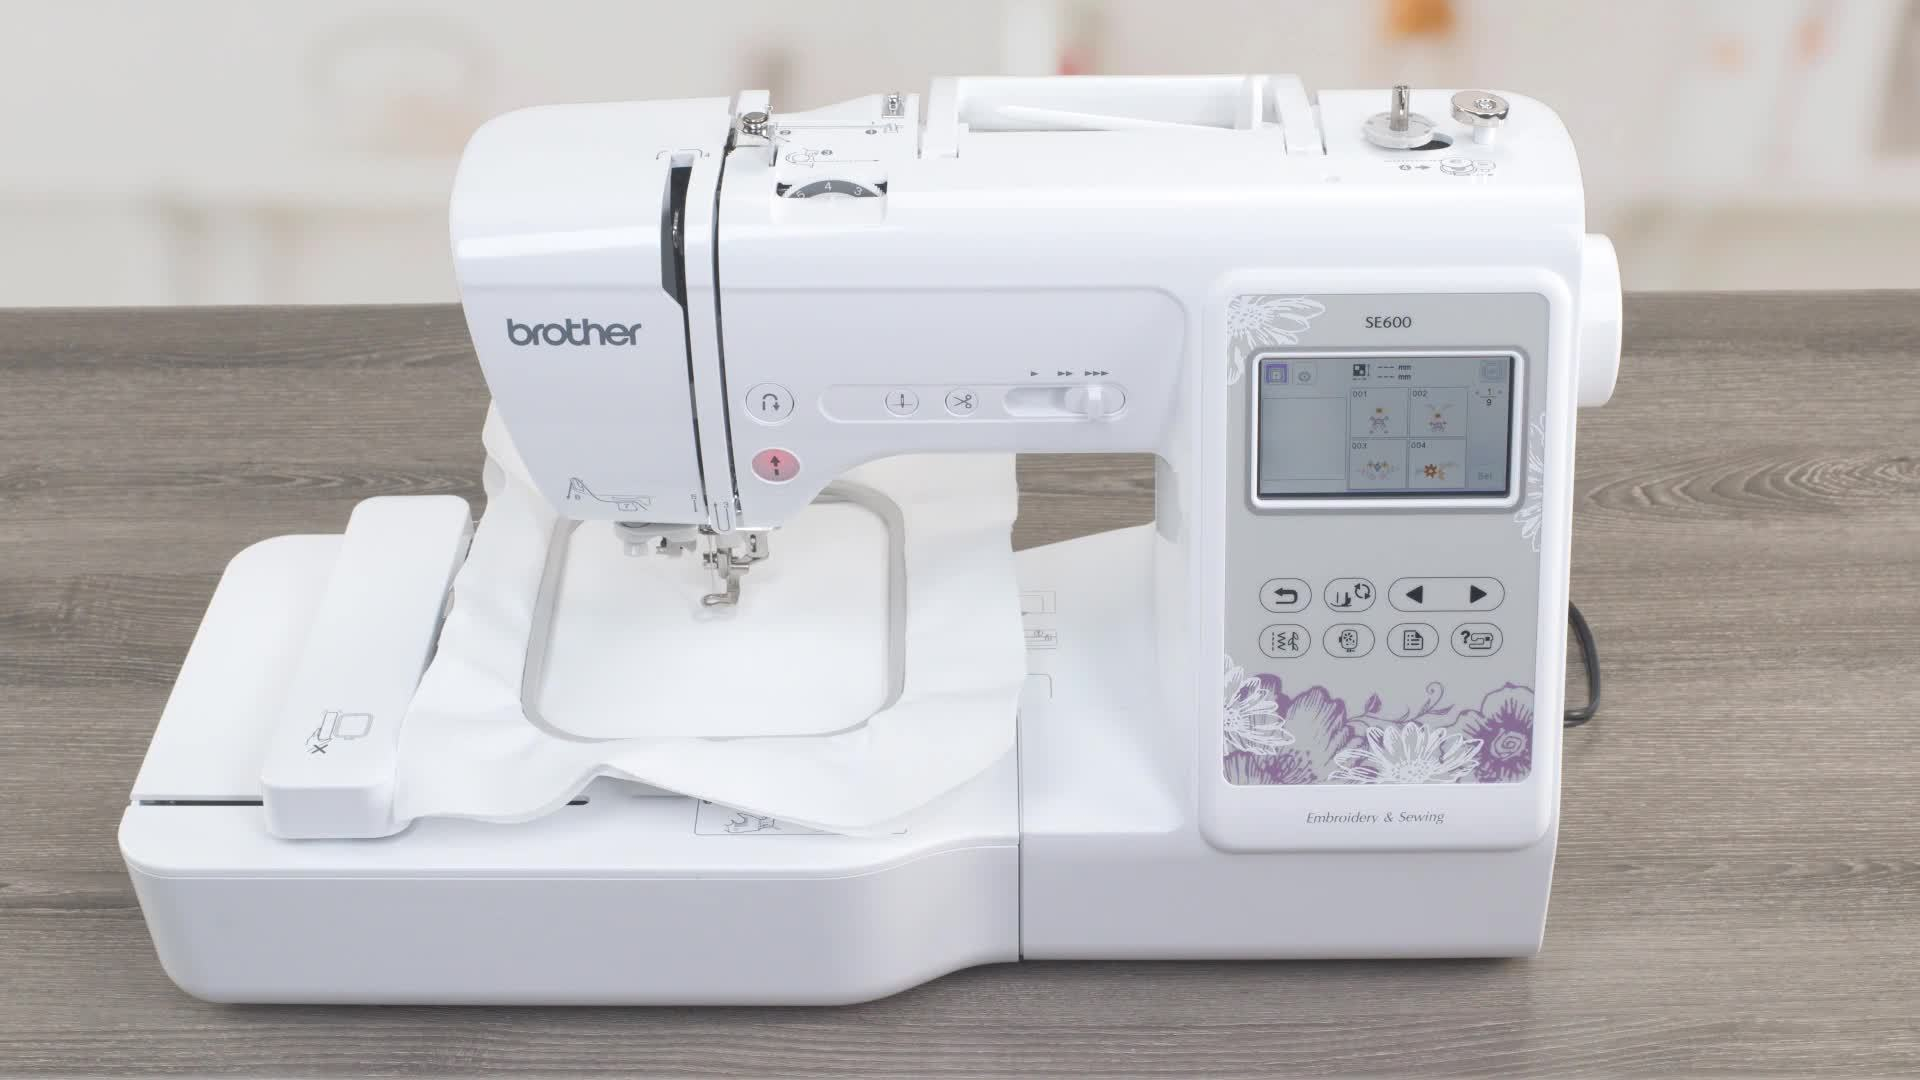 Brother Sewing Machine Embroidery Patterns Best Embroidery Machine For Your Home We Review Our 11 Favorites